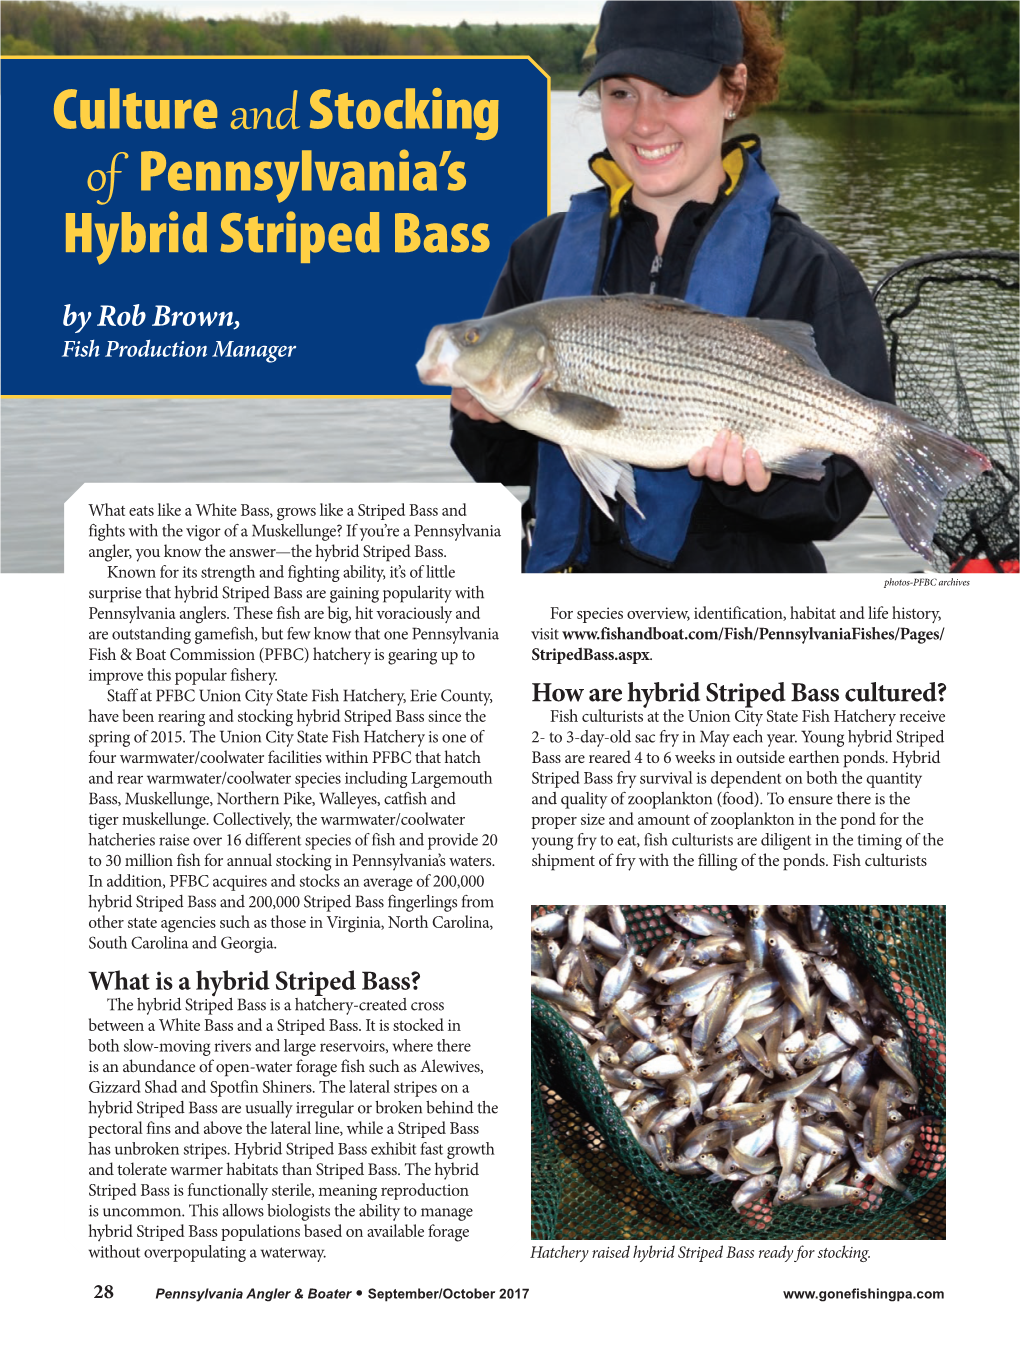 Culture and Stocking of Pennsylvania's Hybrid Striped Bass